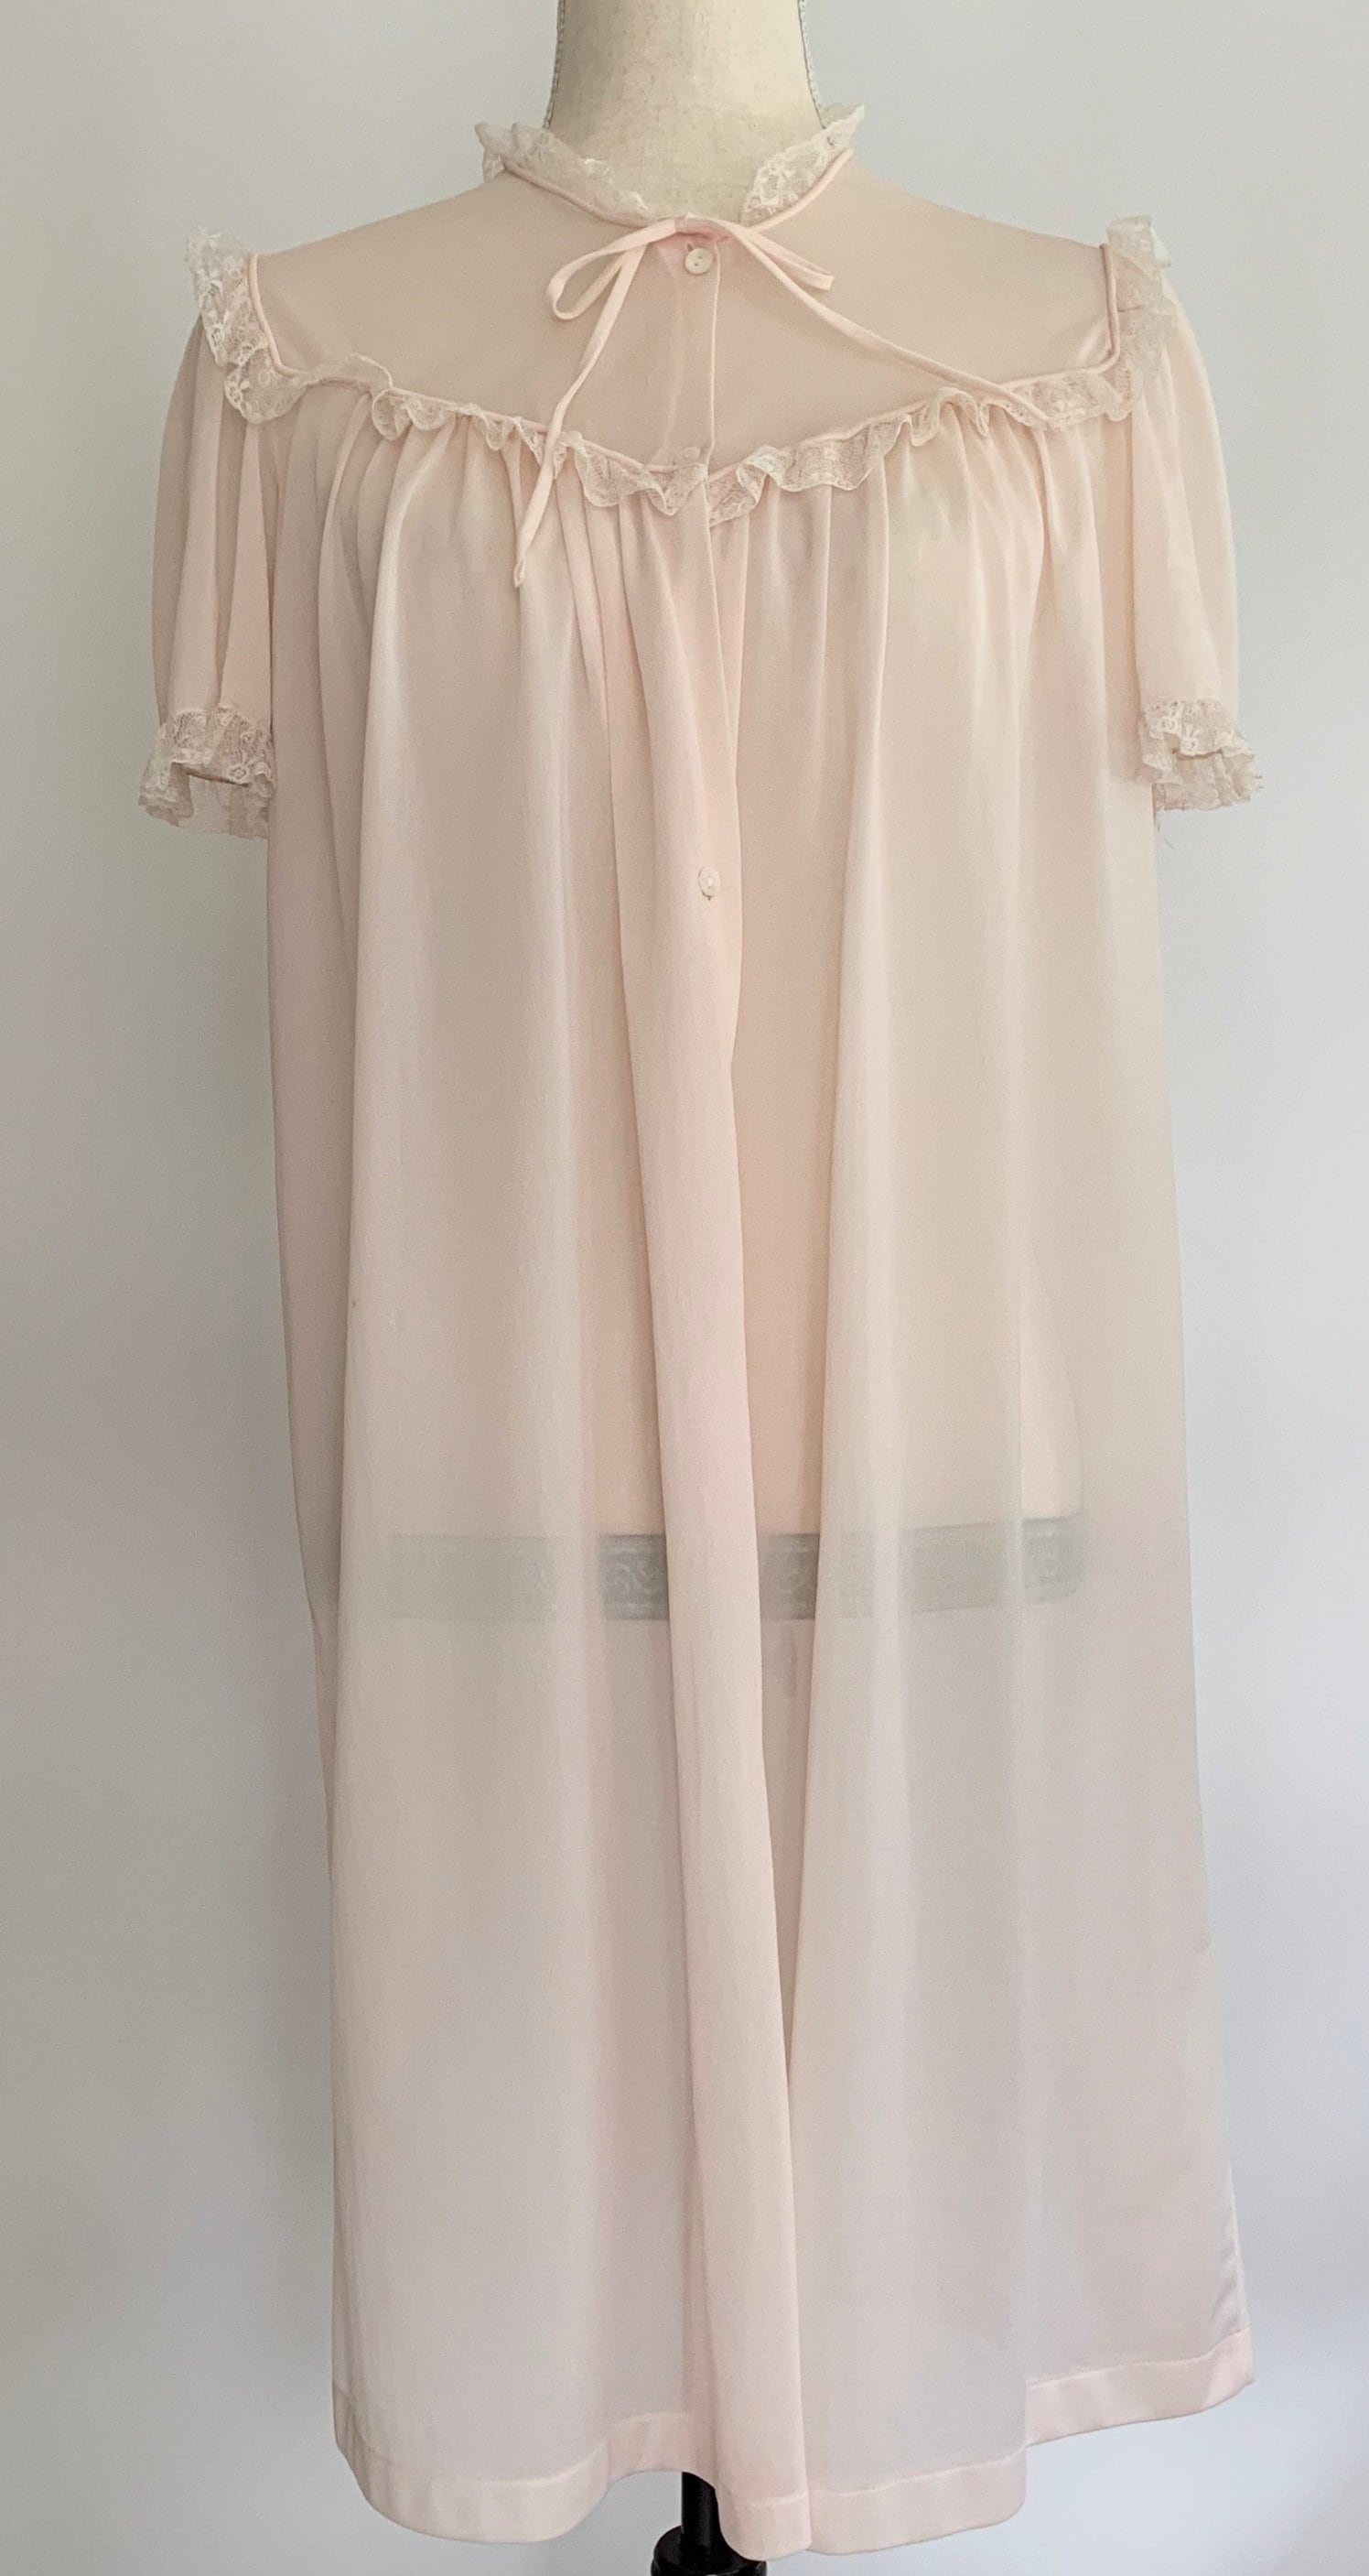 Dusty Pink Dressing Gown Nightgown Nightie Romantic Vintage 50s Pale ...